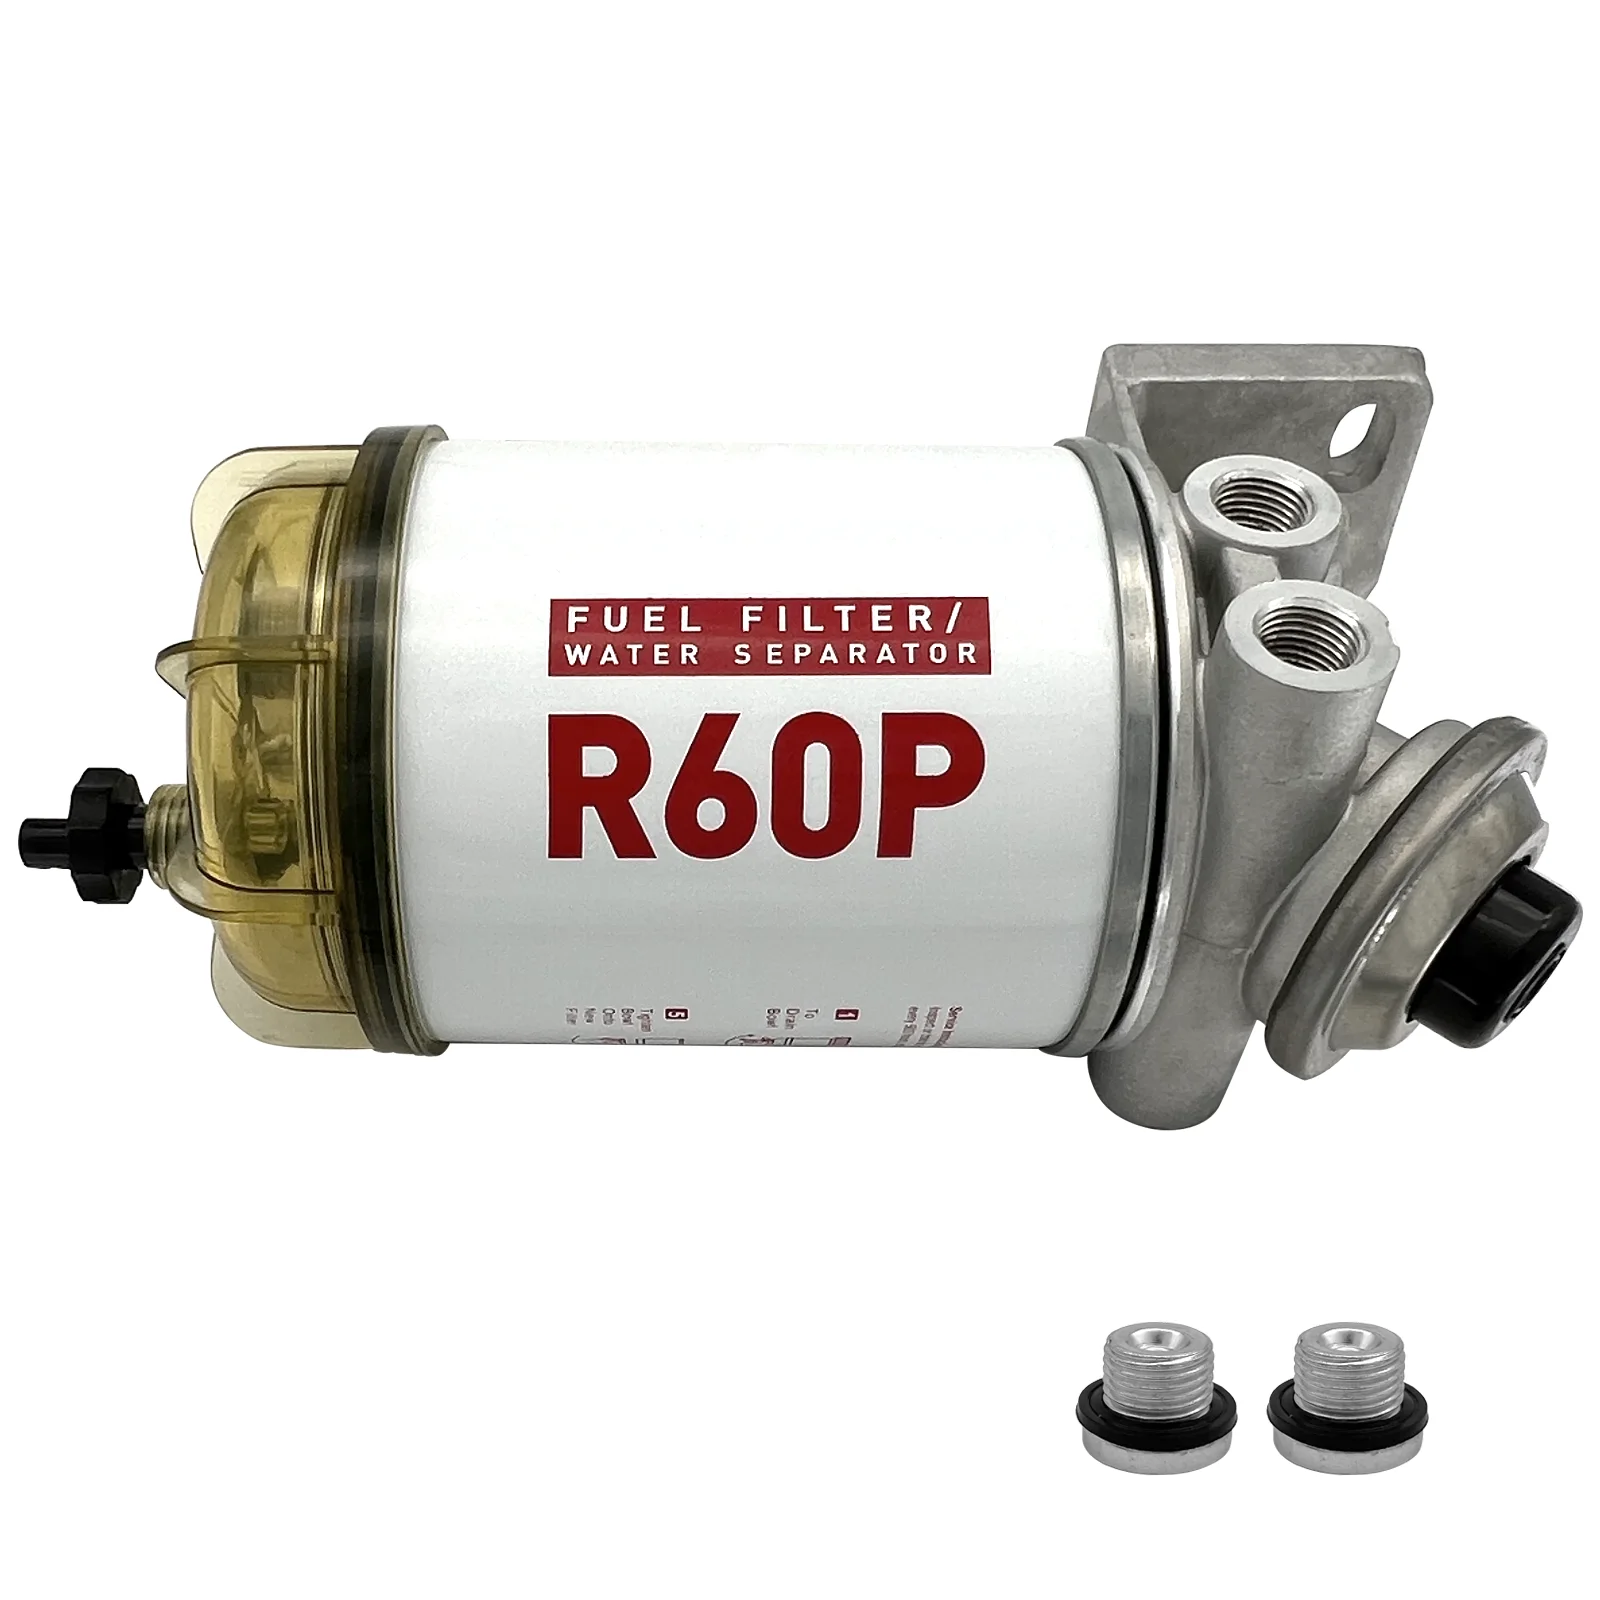 Boat Fuel Filter Water Separator Assembly Outboard R60P Marine for Marine Engine Oil Pump Fuel Filter Hardware supply p ce03 521 oil and gas separator core screw pump oil sub filter suitable for 50hp oil sub core